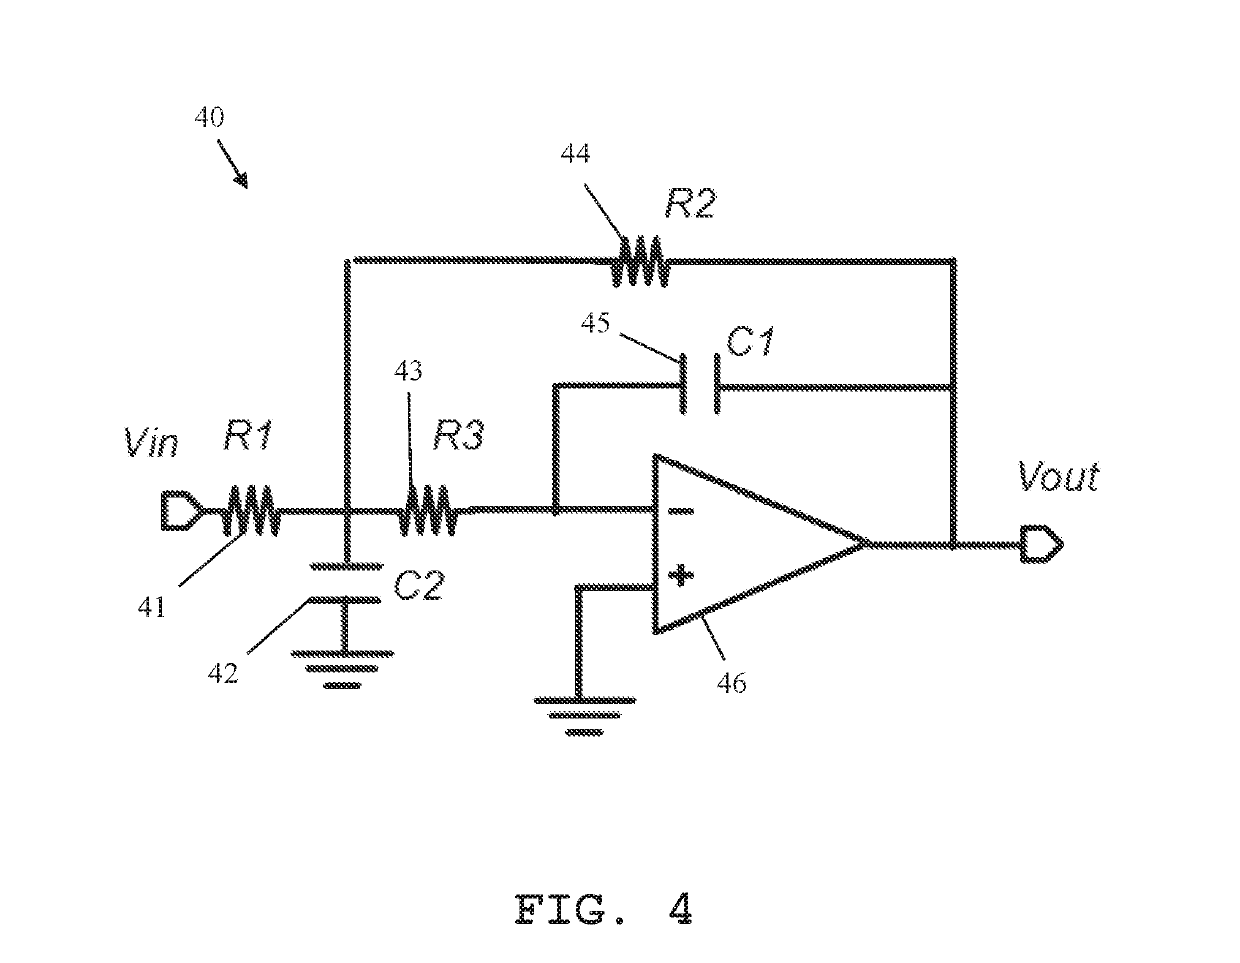 Filter Circuit with Programmable Gain and Frequency Response